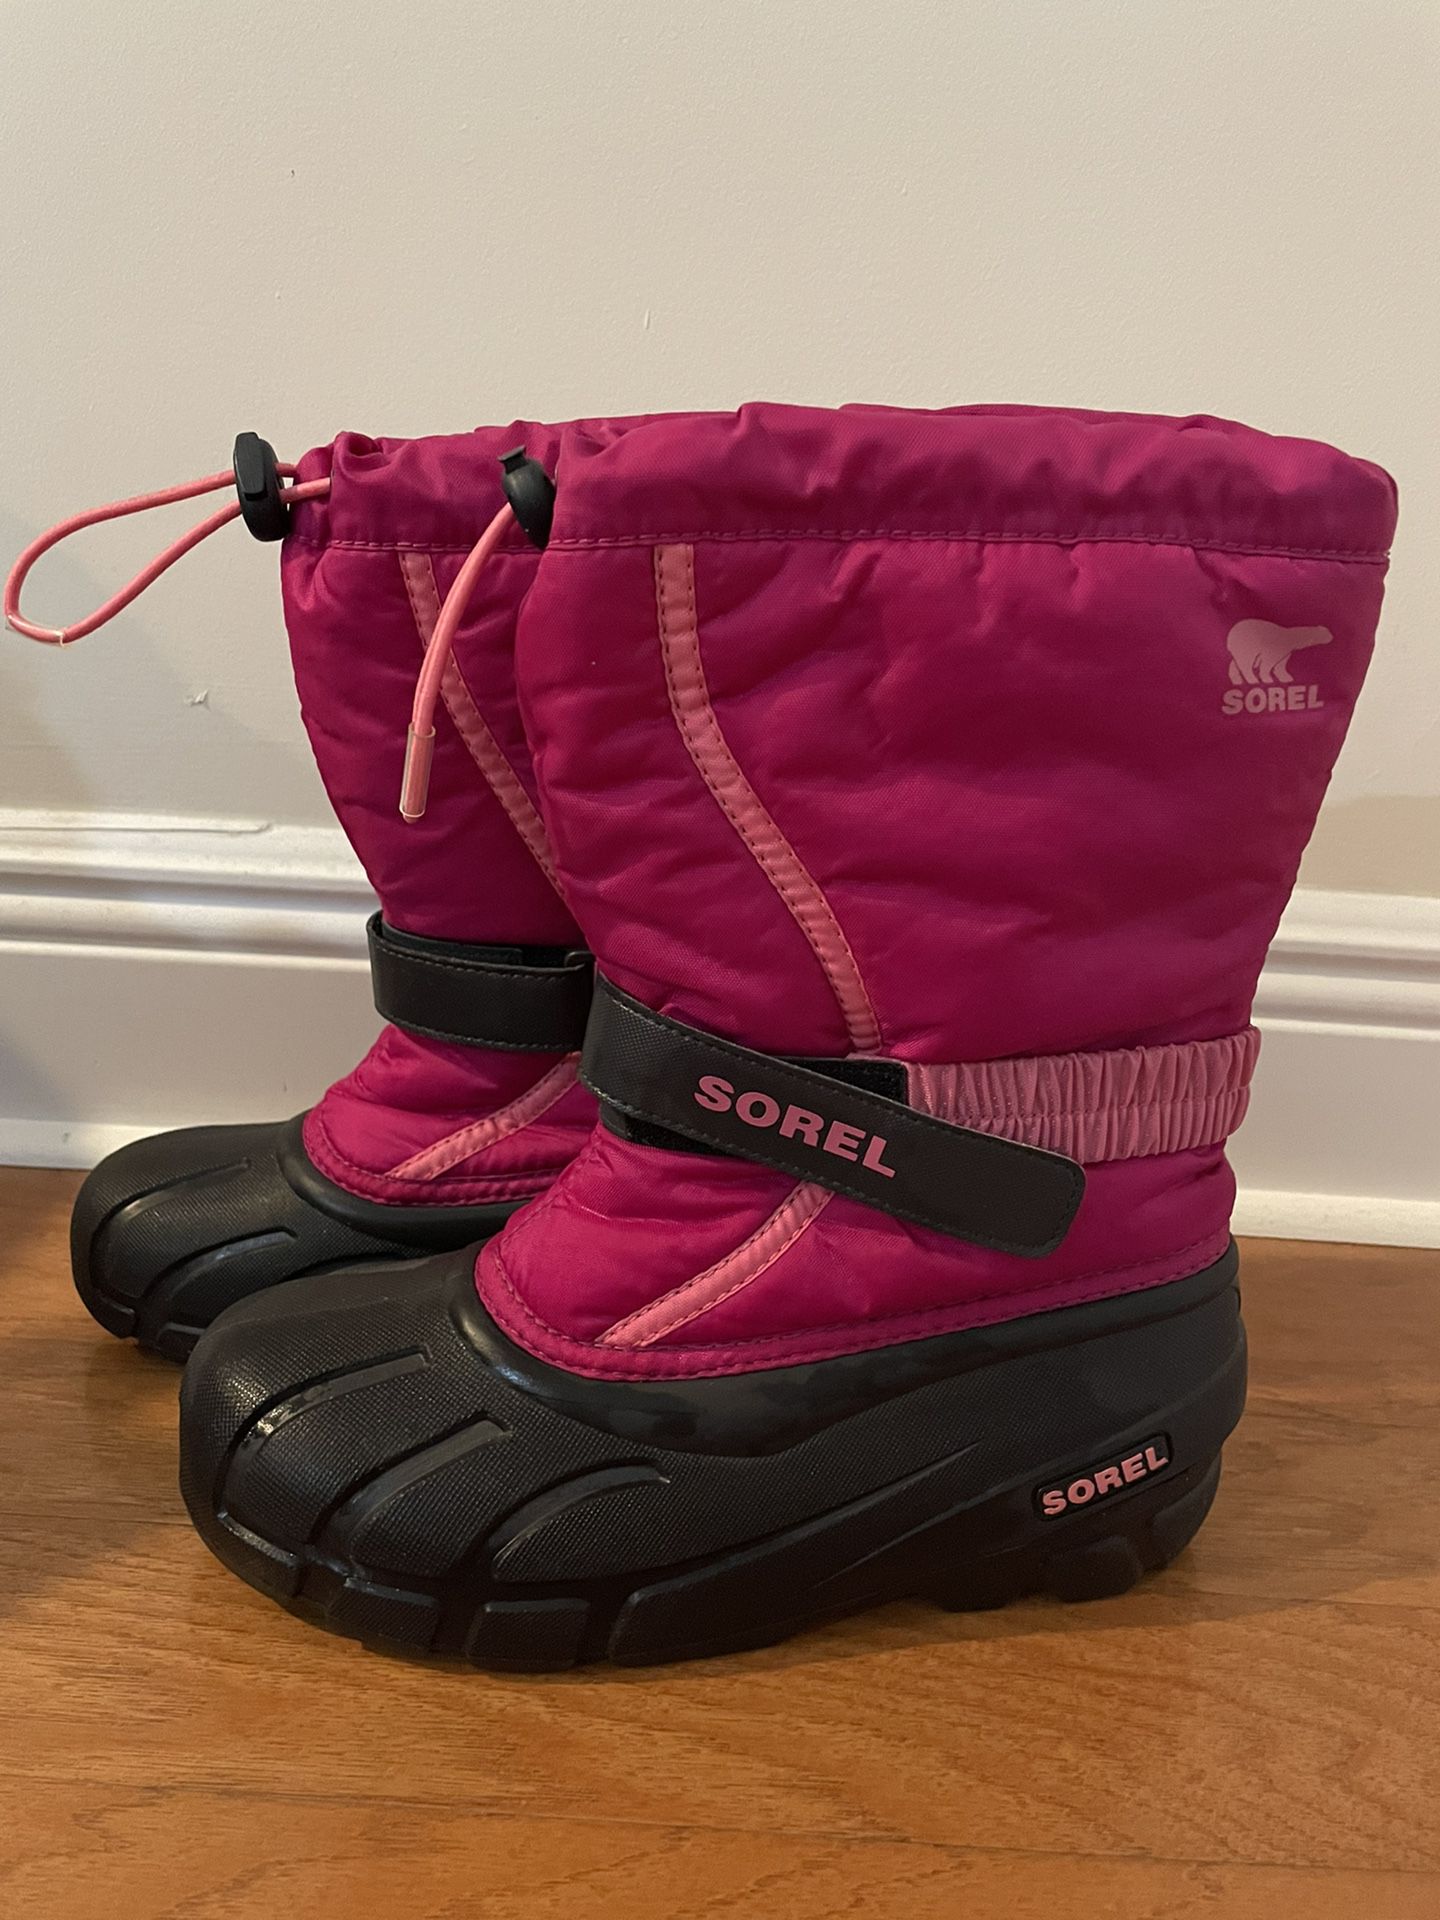 Sorel Pink Snow Boots - Size 5